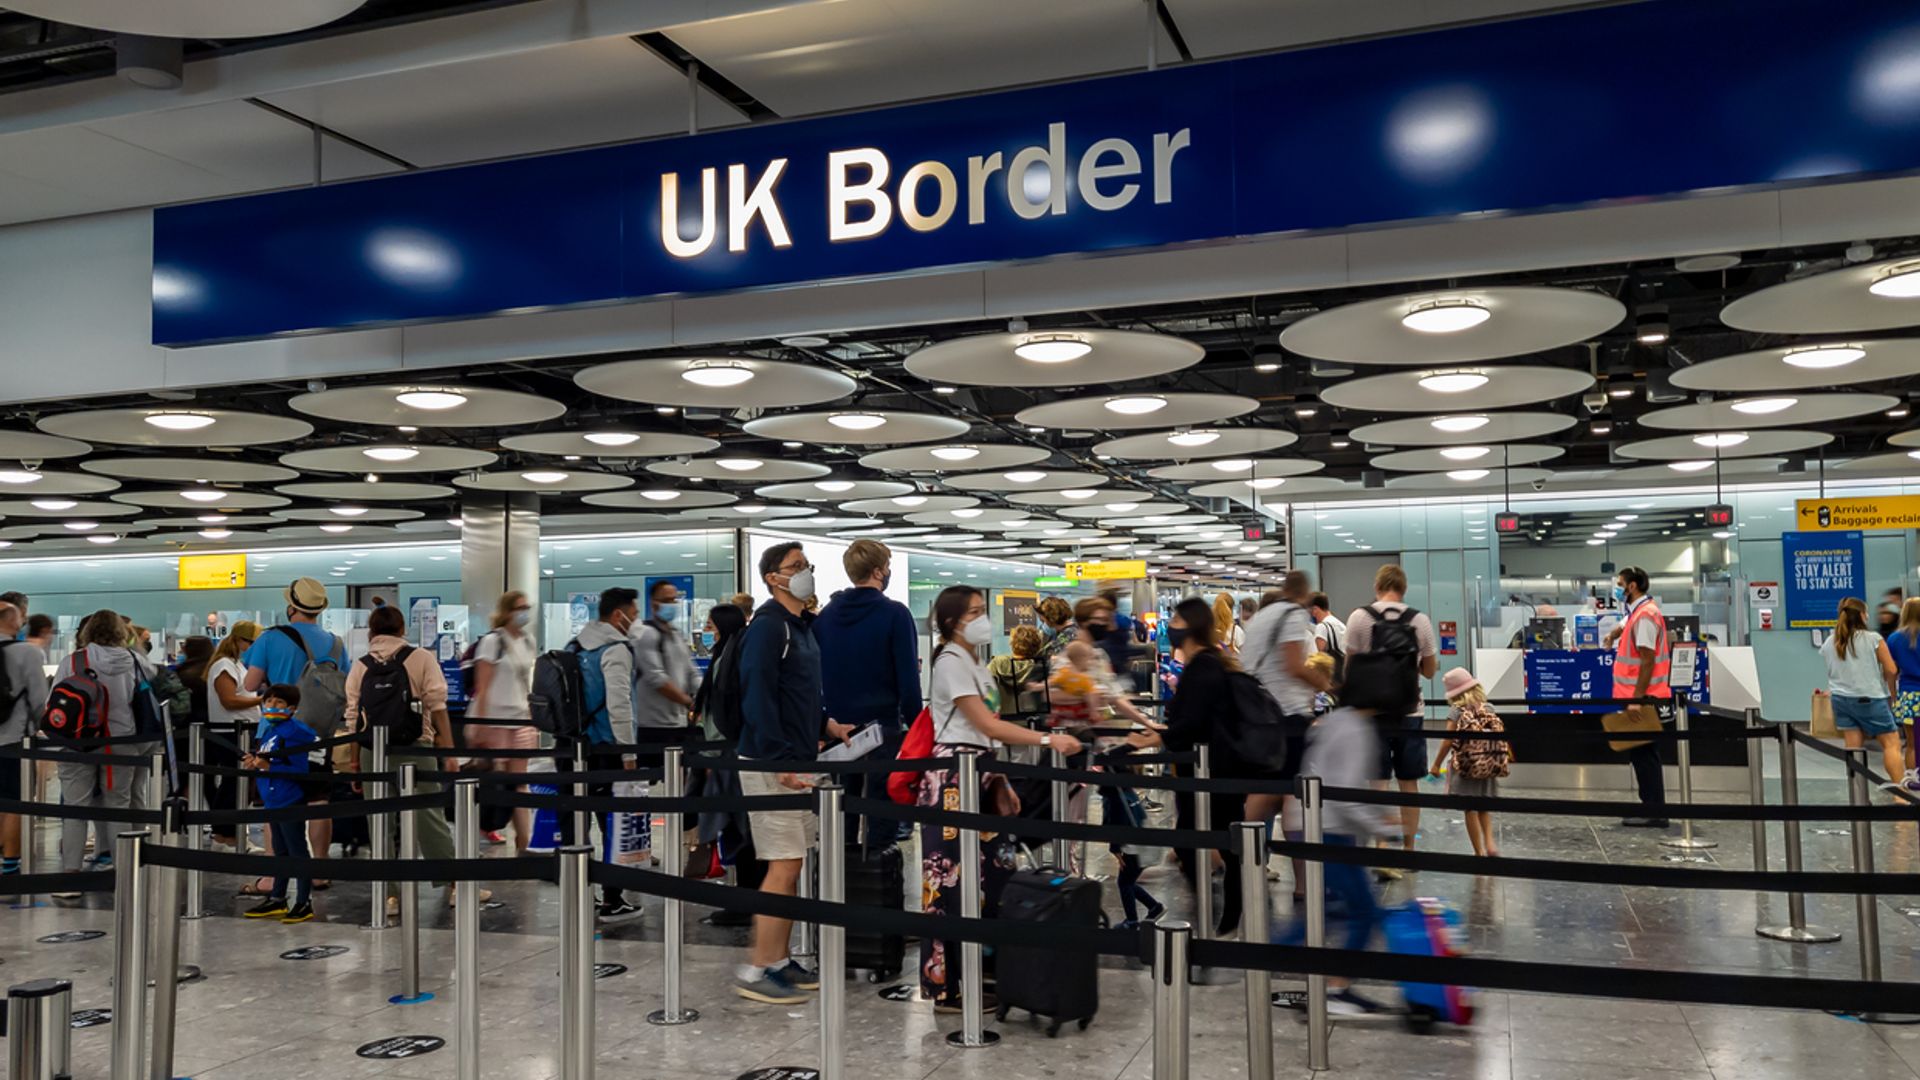 Border Force to stage more strikes at Heathrow Airport - here are the dates...